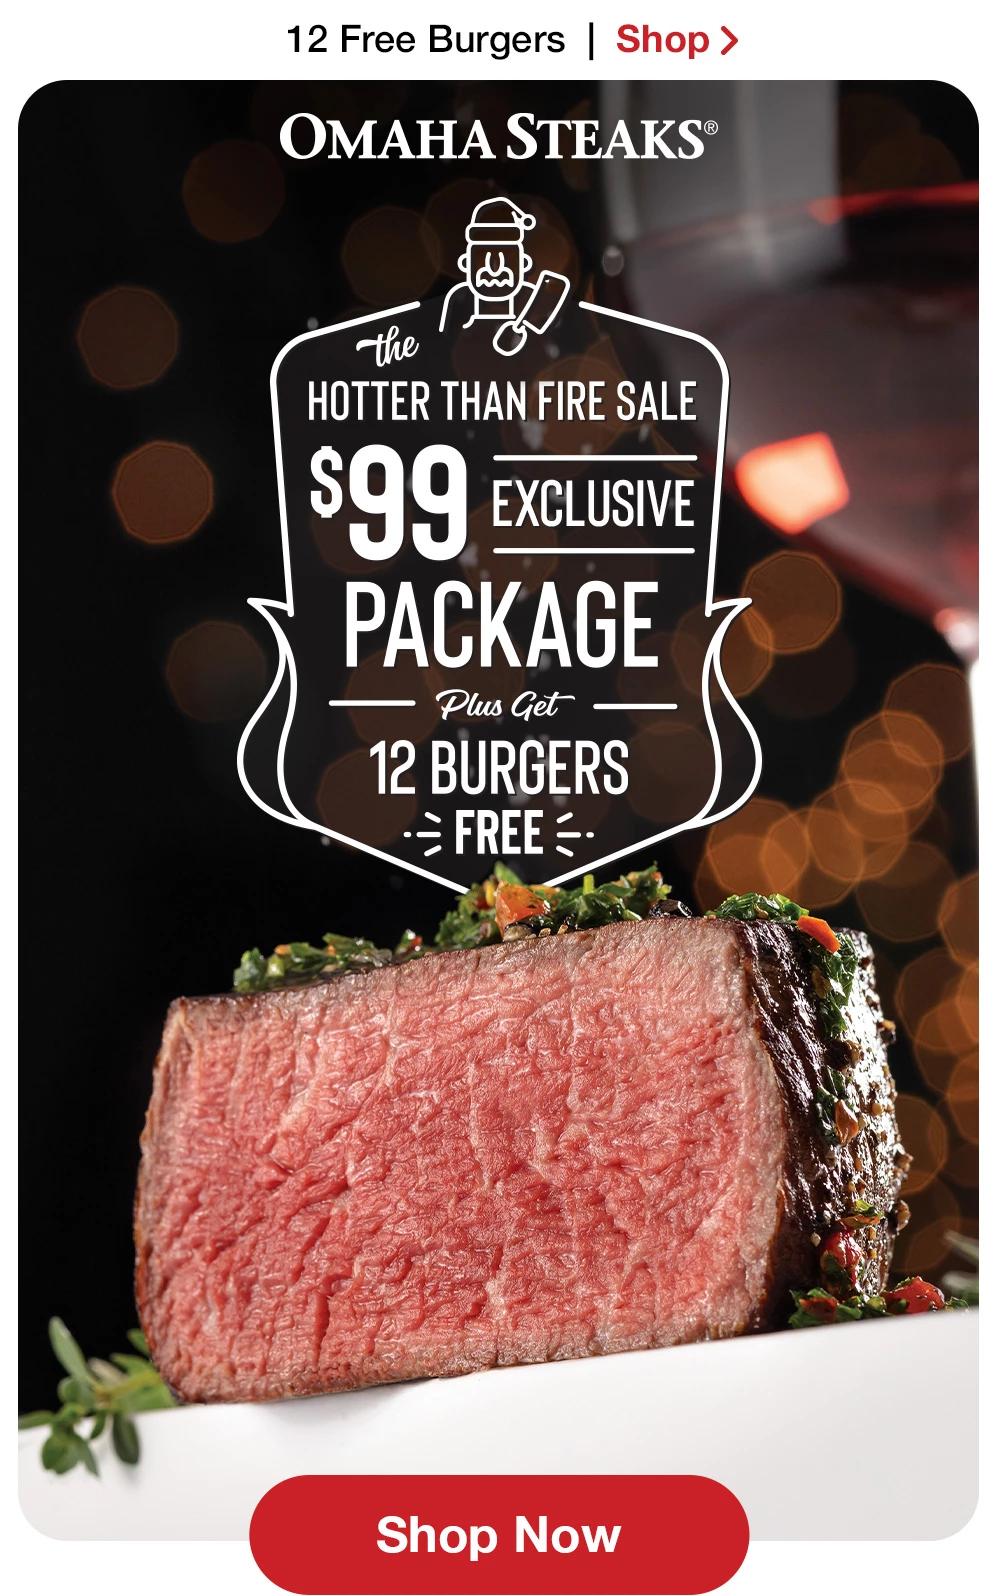 12 Free Burgers | Shop >  OMAHA STEAKS® the HOTTER THAN FIRE SALE - 99 EXCLUSIVE PACKAGE - Plus Get 12 BURGERS FREE || Shop Now